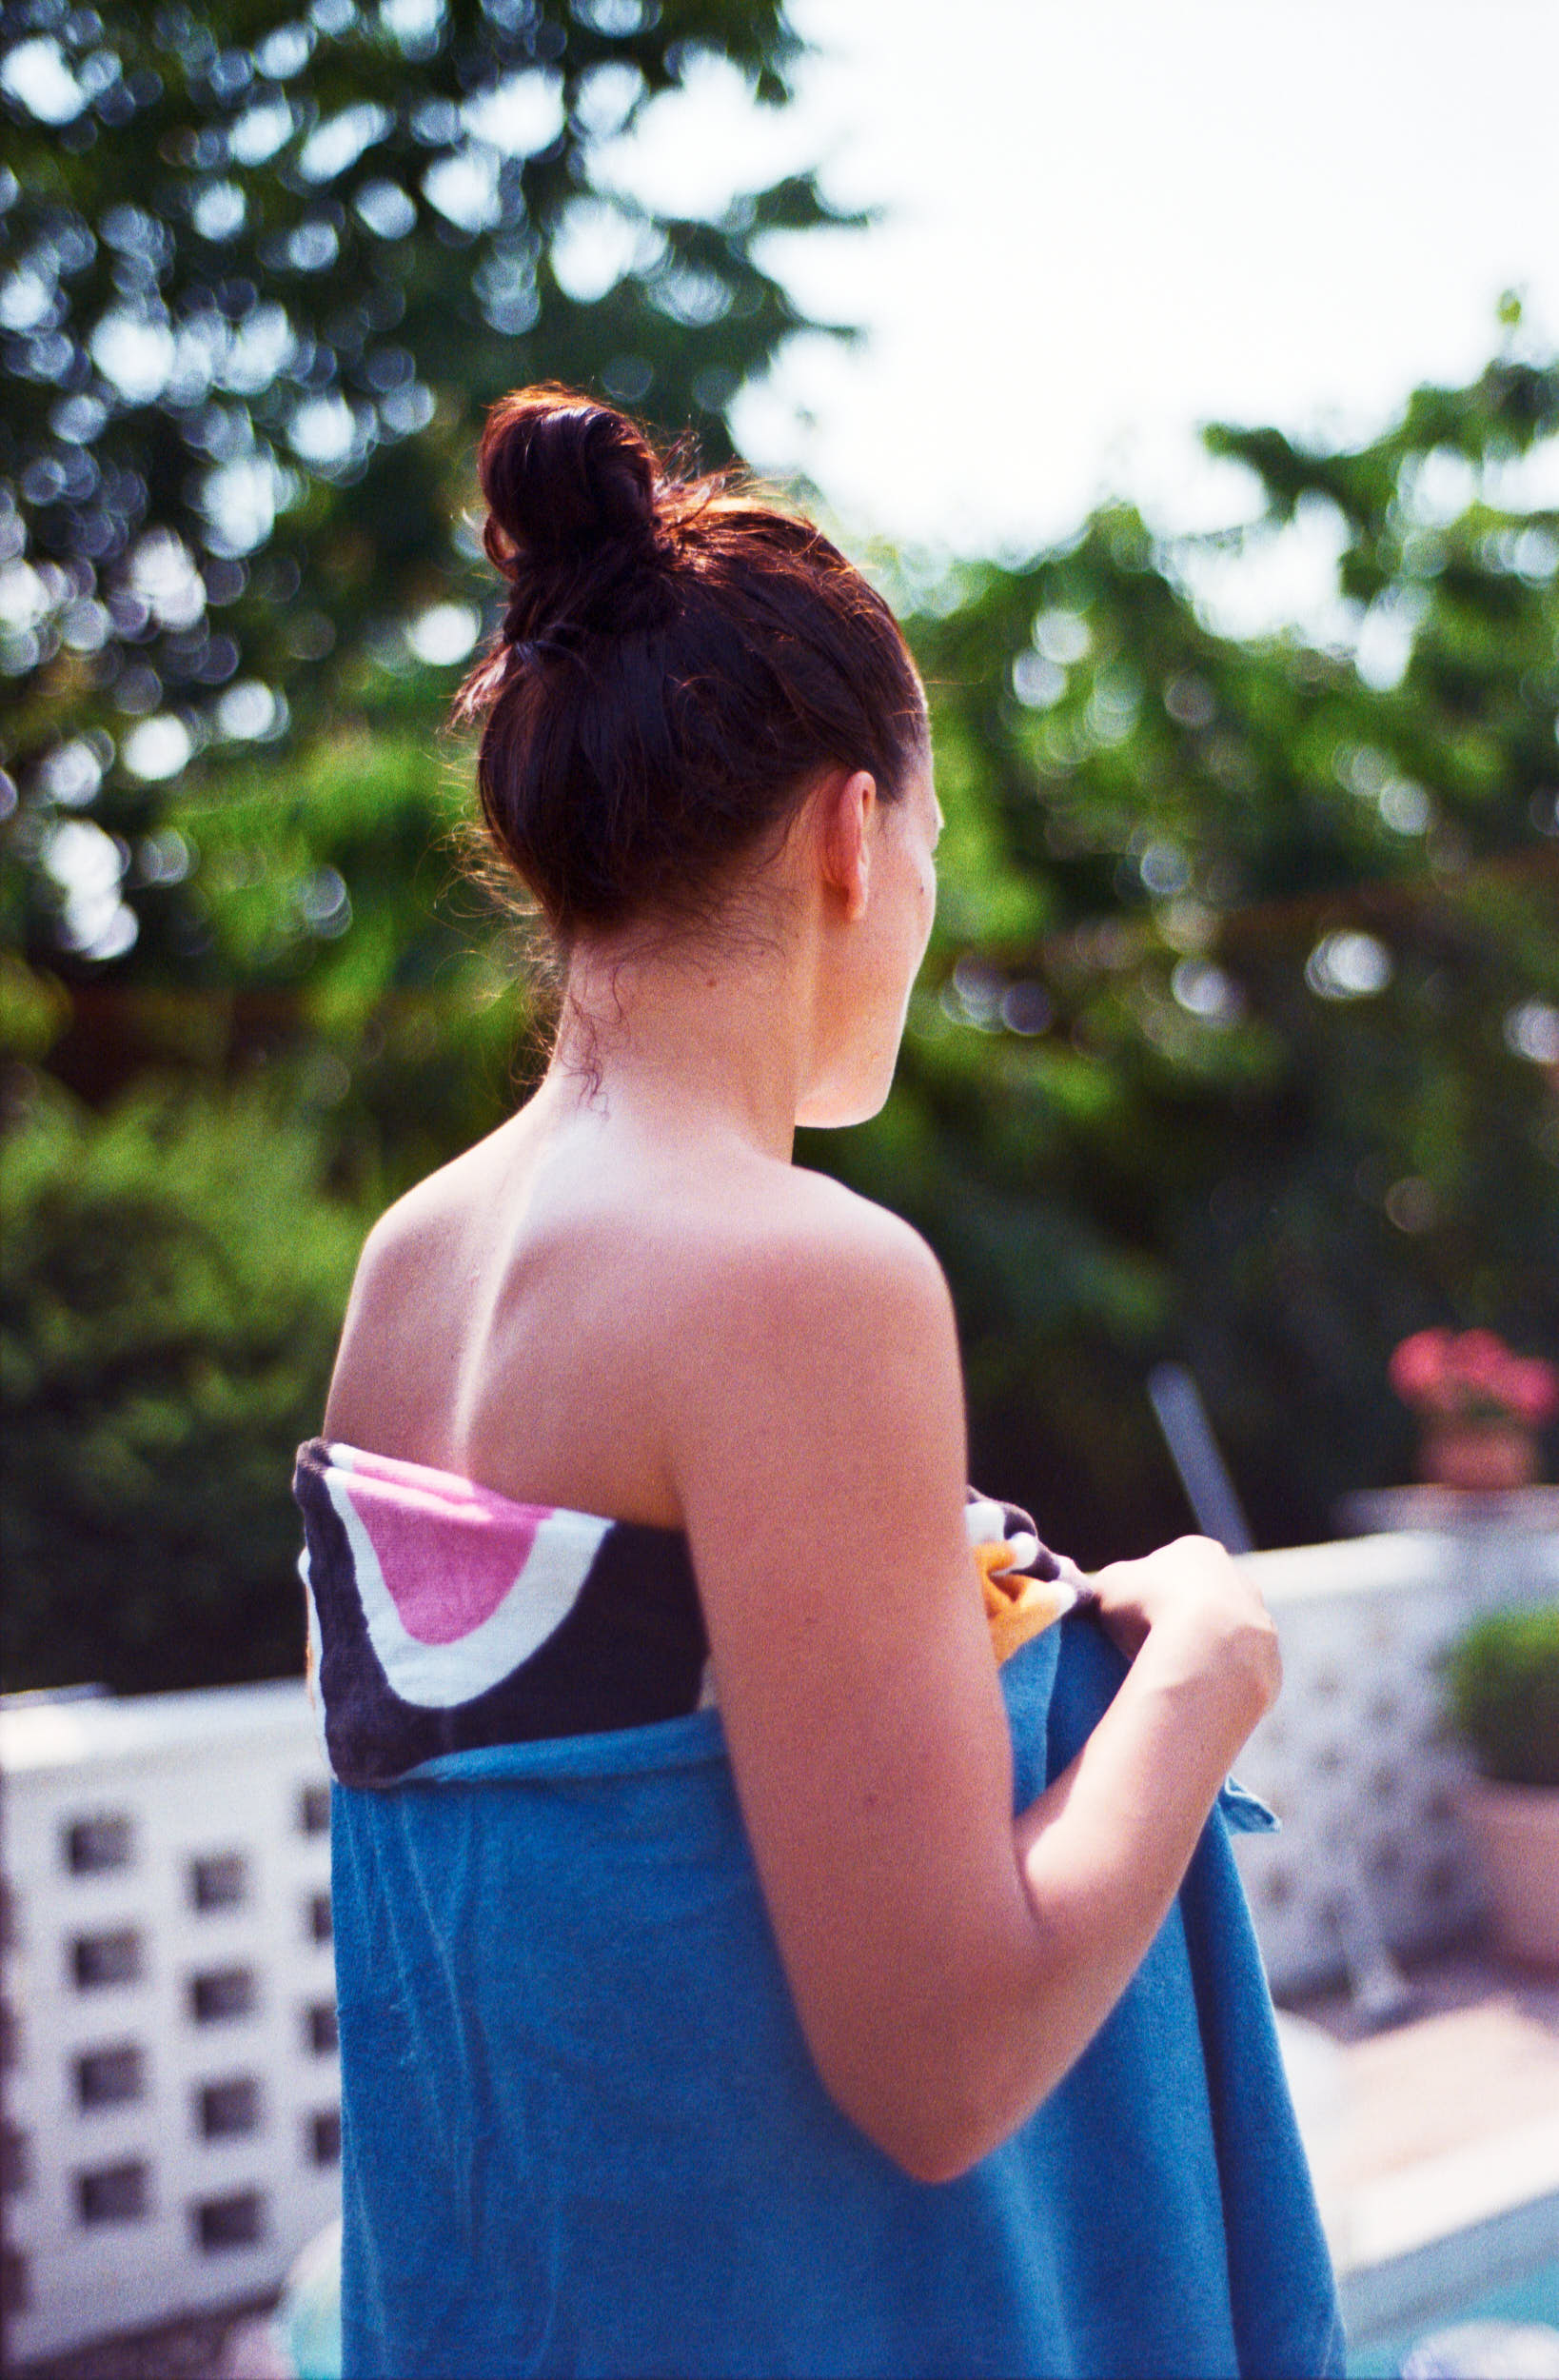 A girl standing by the pool with towel wrapped around her body.